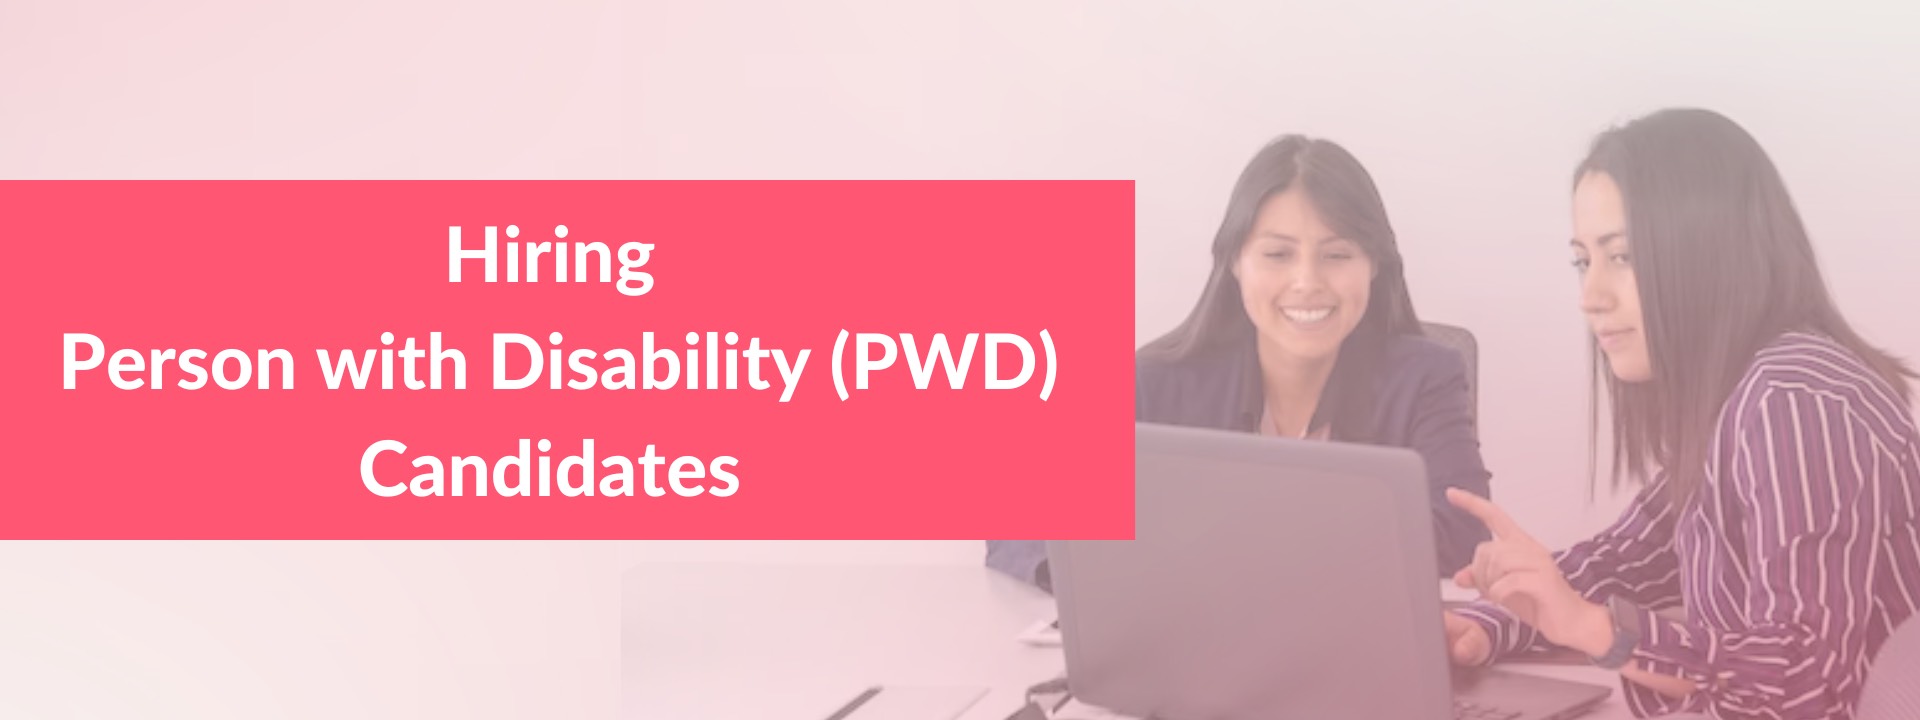 Pwd-Community-Women-Page-Banner-Image